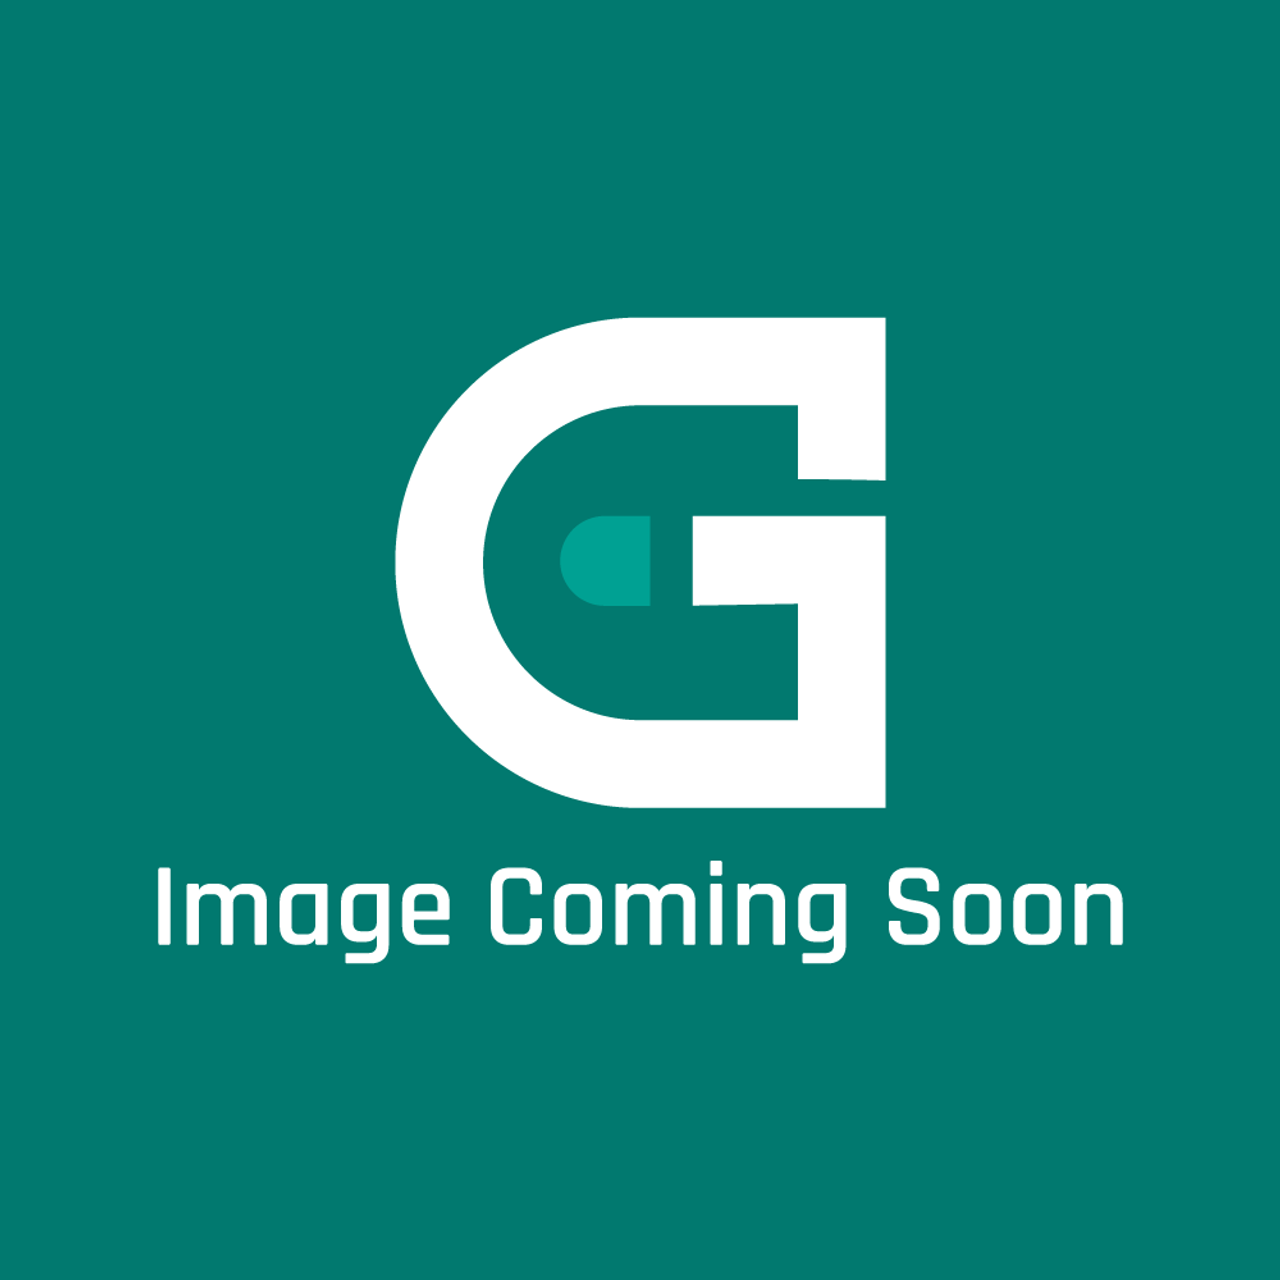 LG 1TTL0403018 - Screw,Tapping - Image Coming Soon!